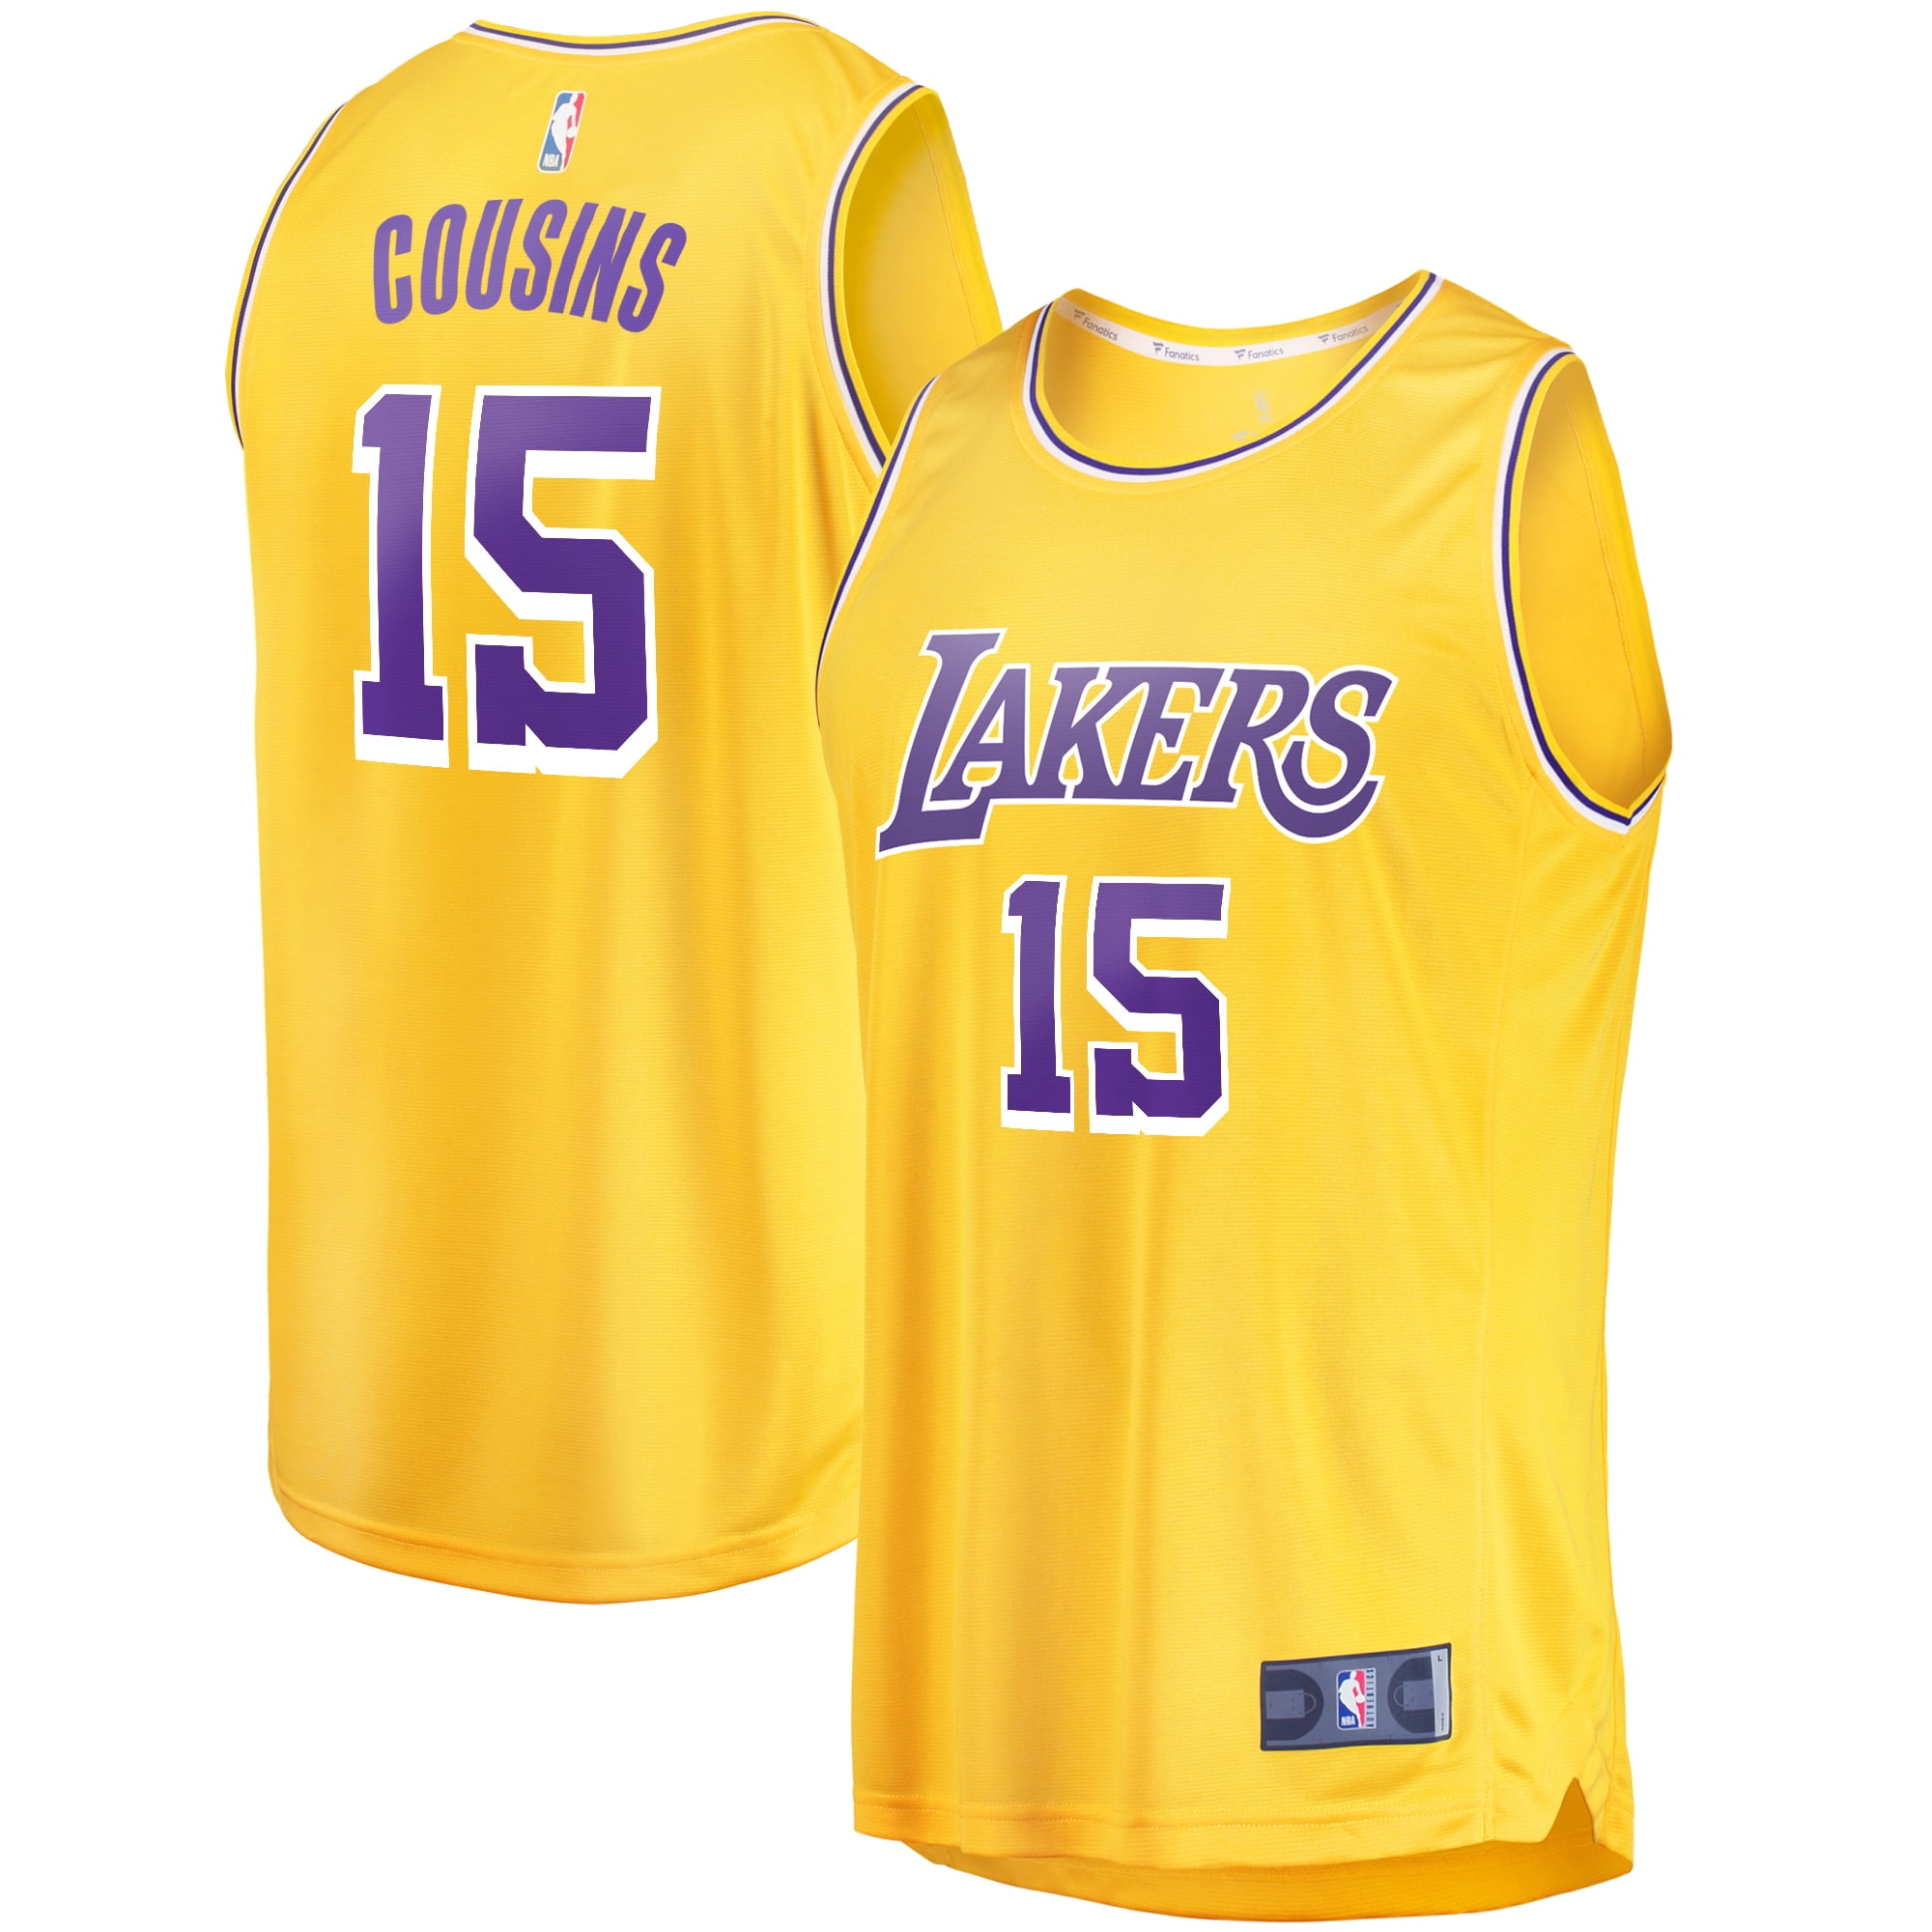 cousins lakers jersey